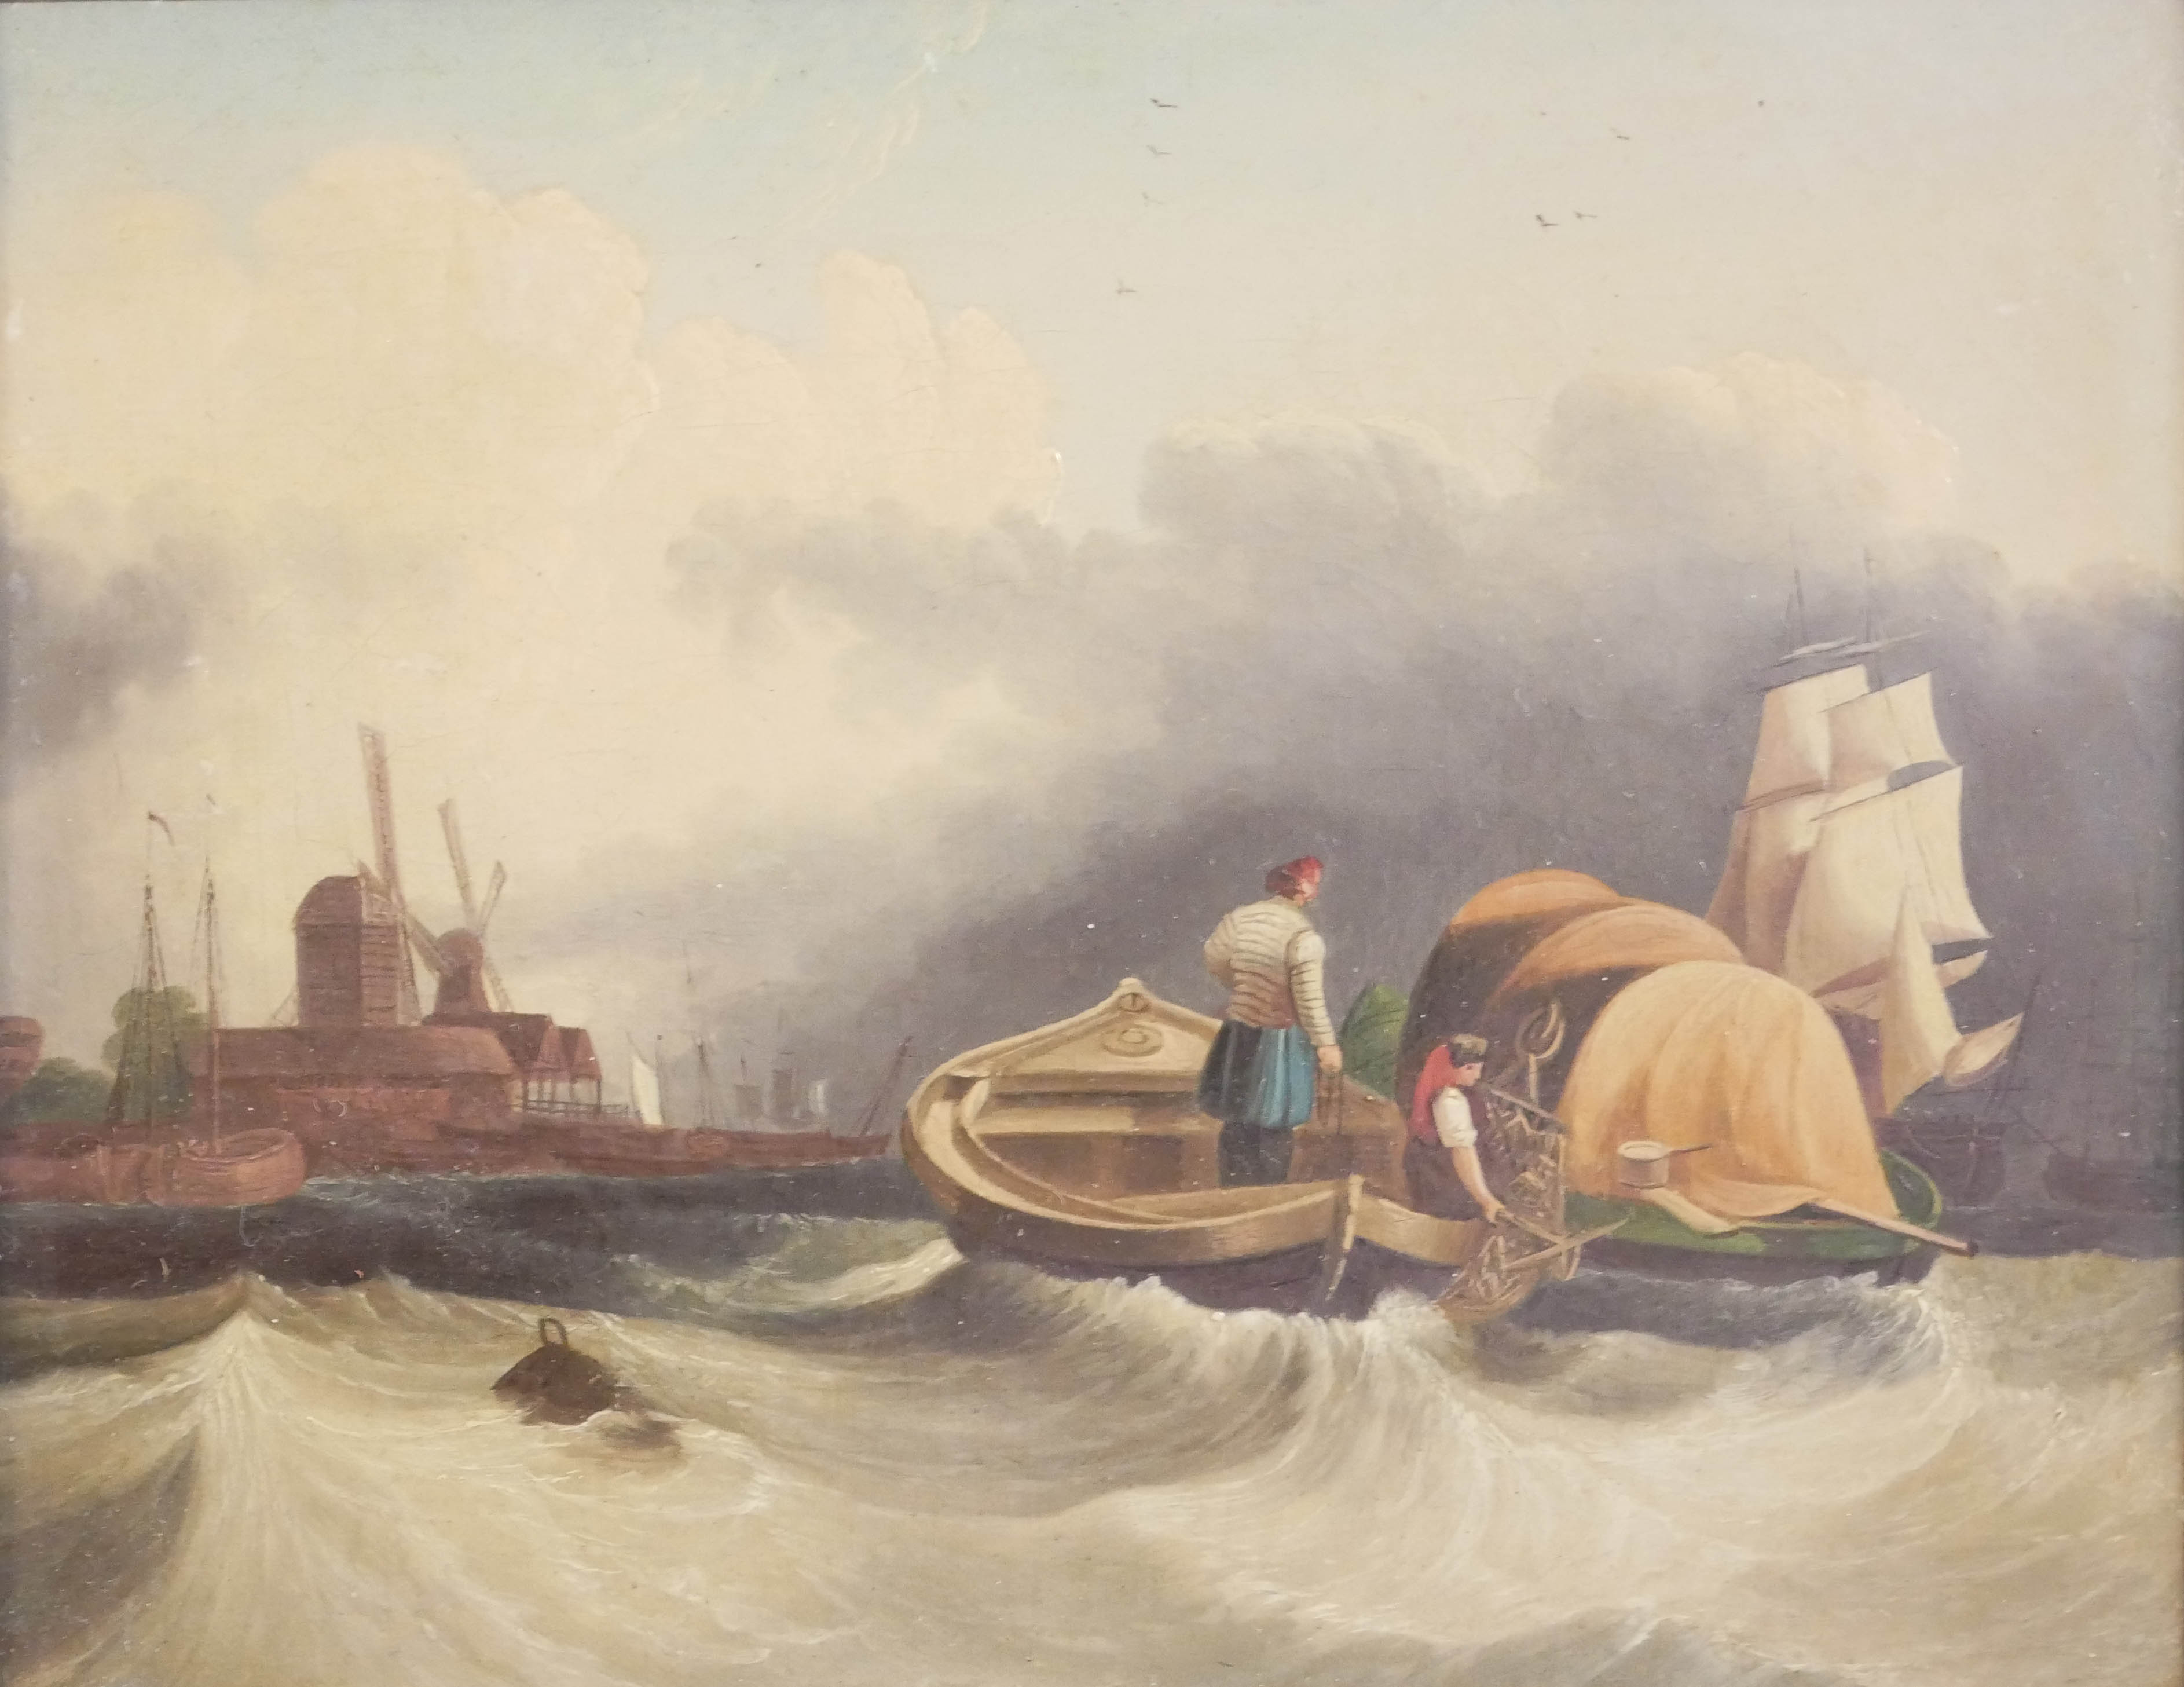 J.M. POWELL , EXHIBITED 1783 - 1824, OIL ON CANVAS Fishermen approaching harbour, bearing details